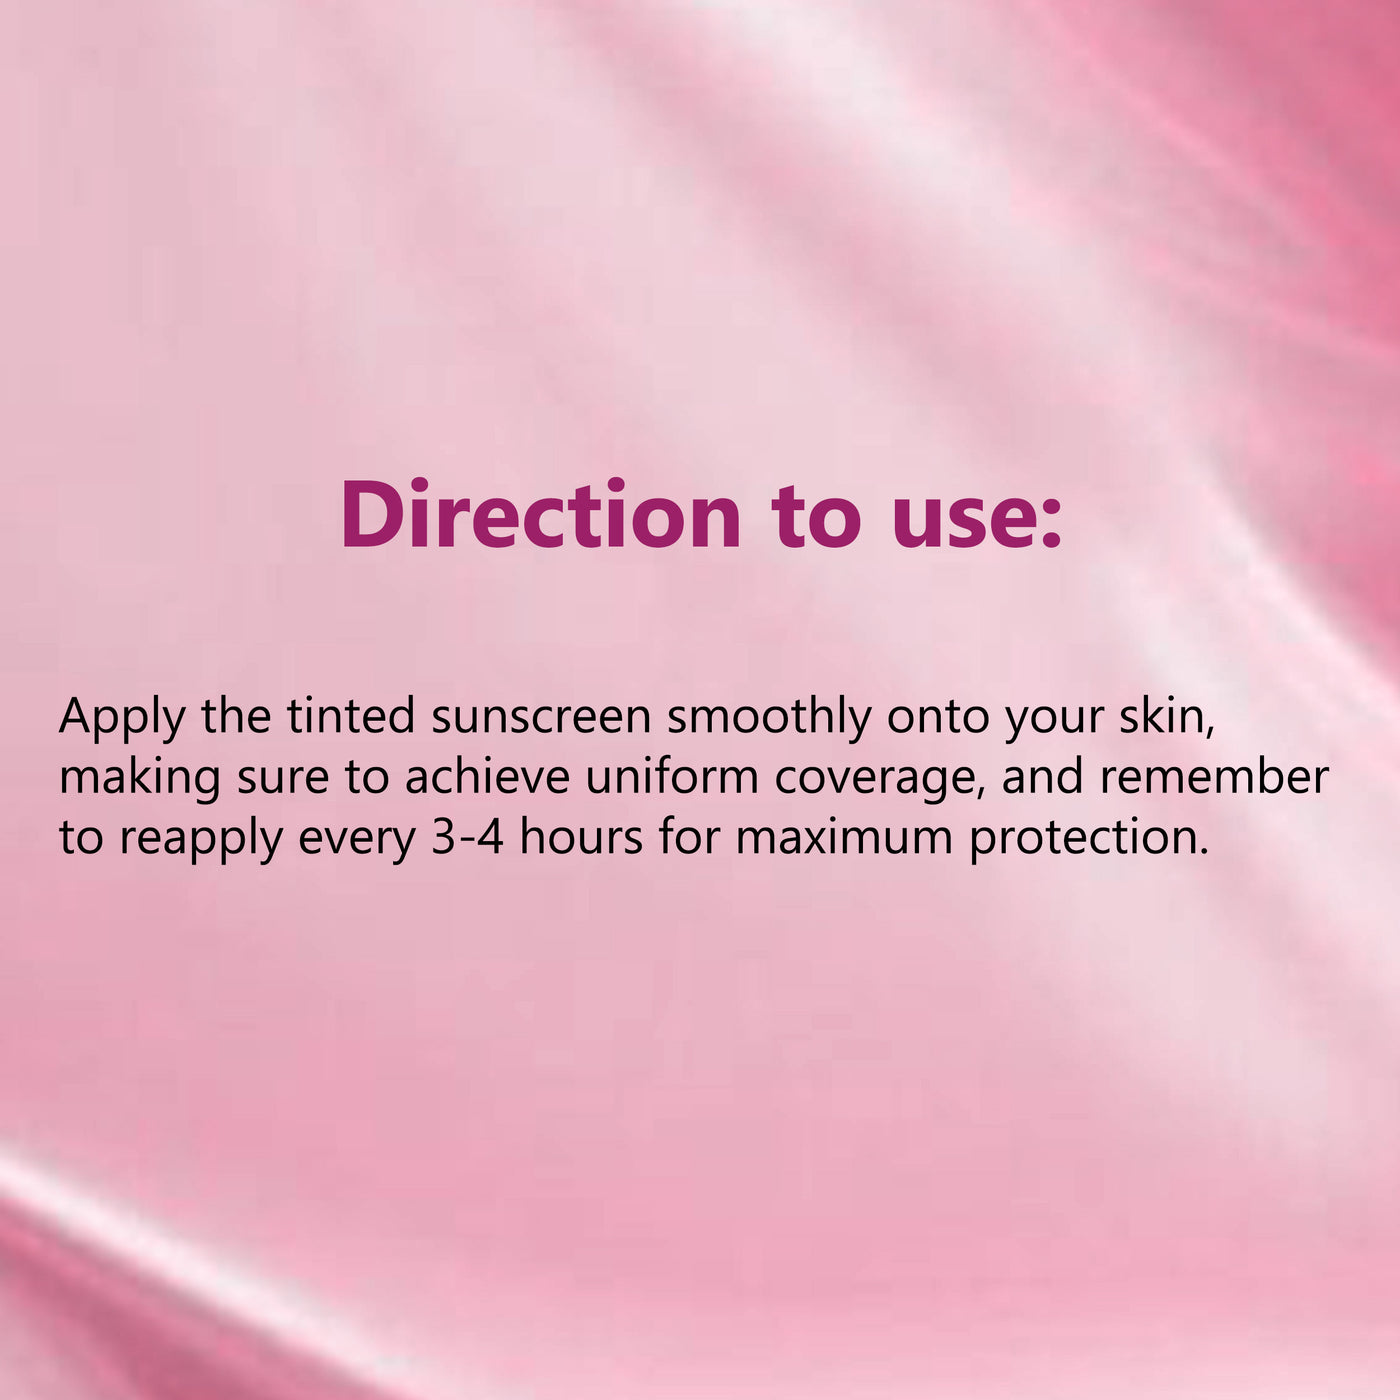 Tinted Red Onion Sunscreen SPF 50